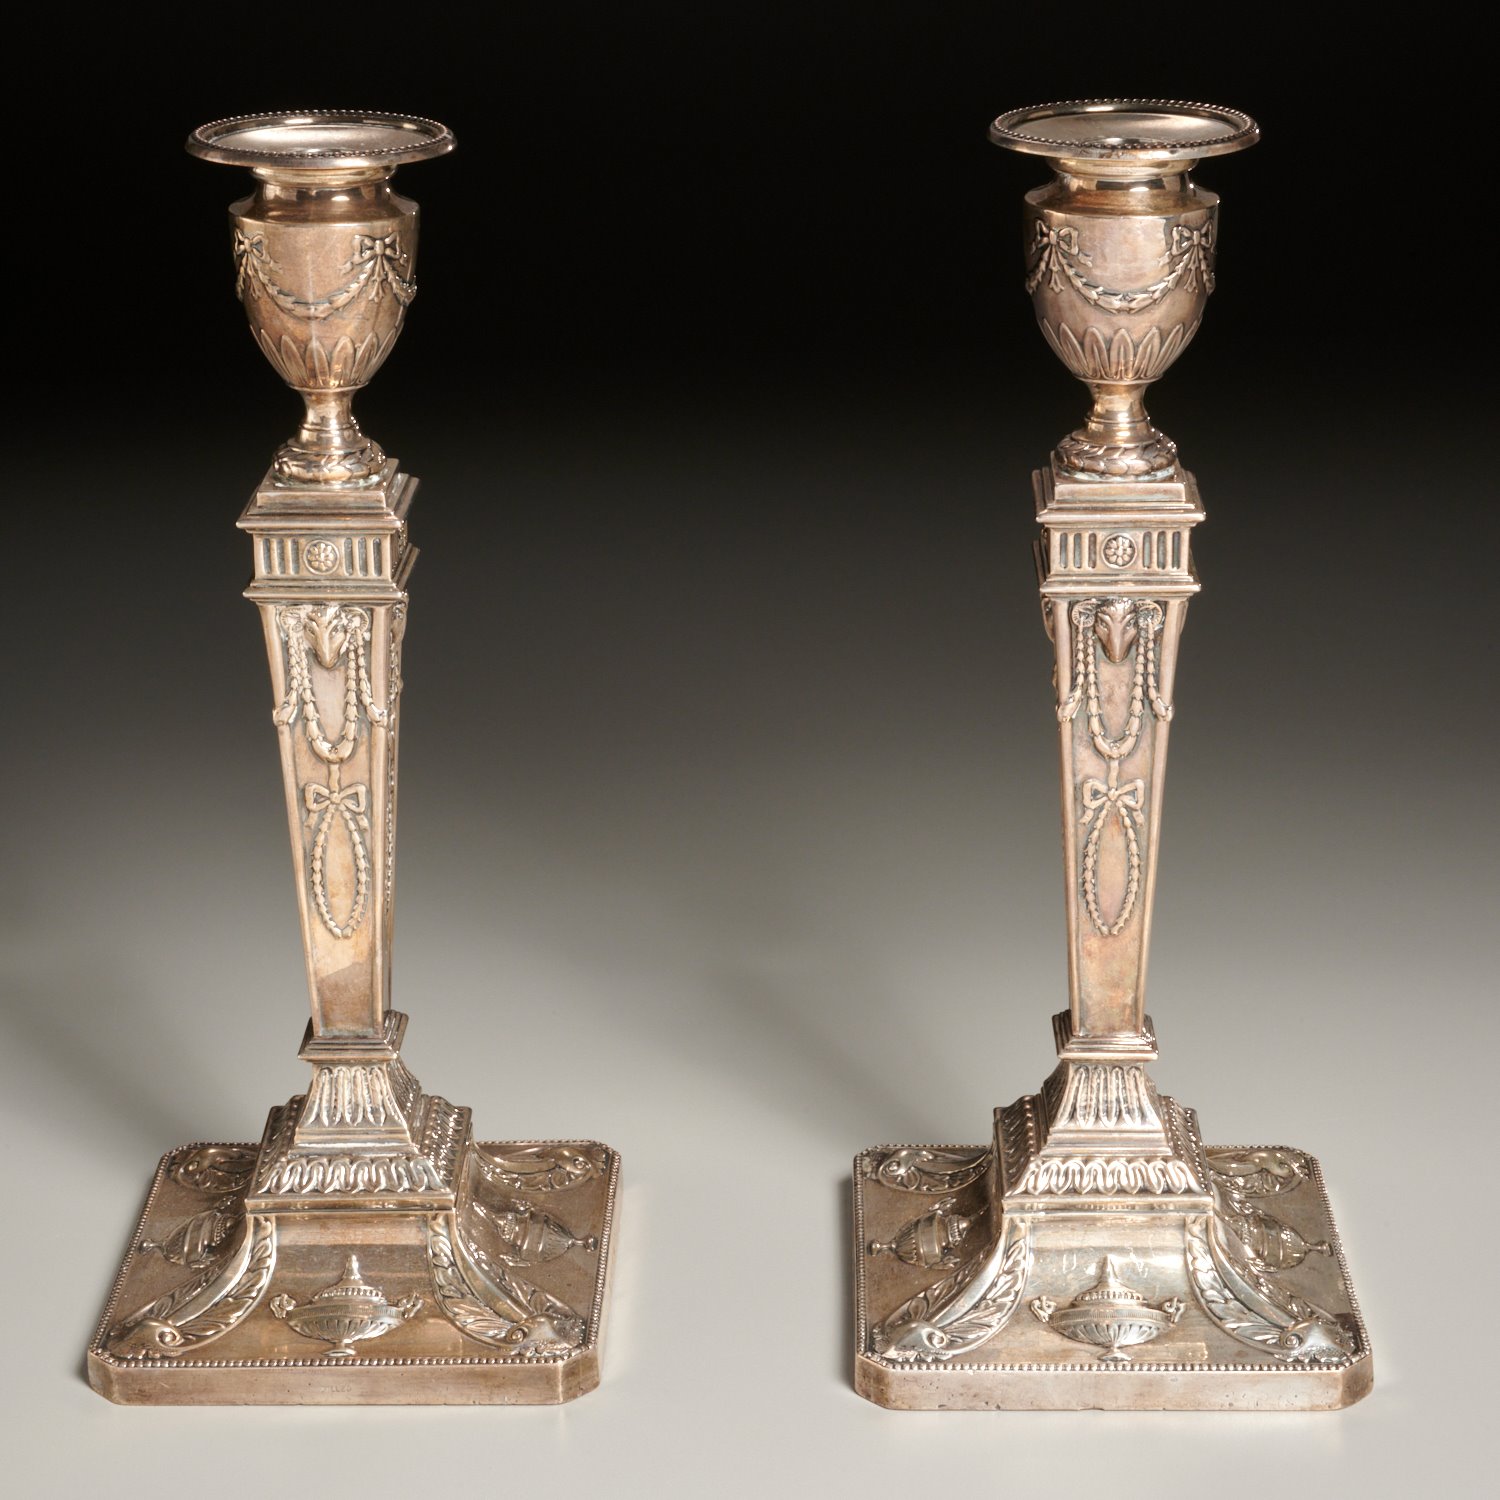 PAIR GEORGE V WEIGHTED SILVER CANDLESTICKS 2a5d9d